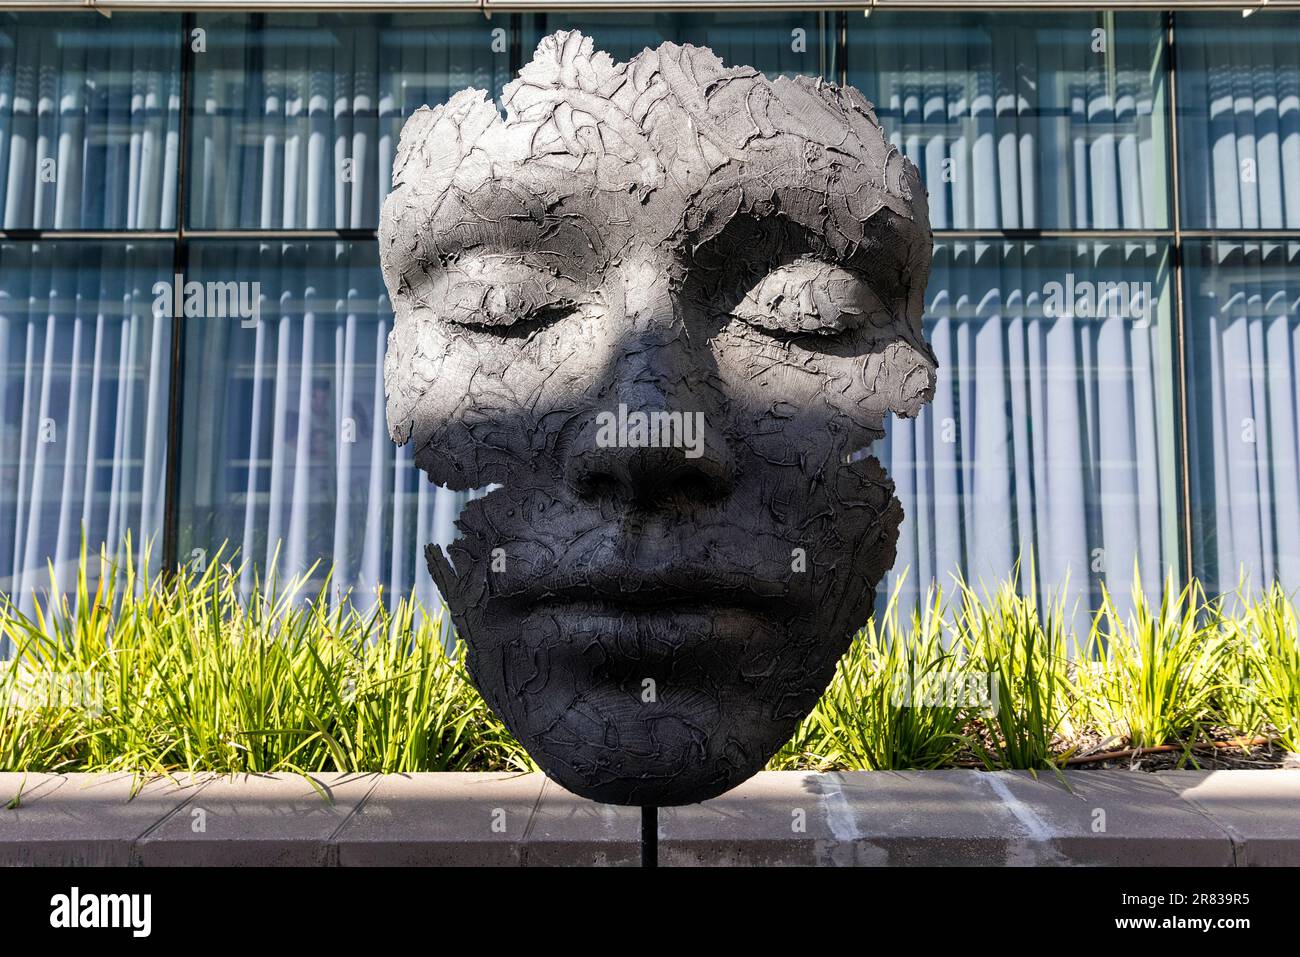 Large bronze face sculpture by artist Marco Olivier in the V&A ...